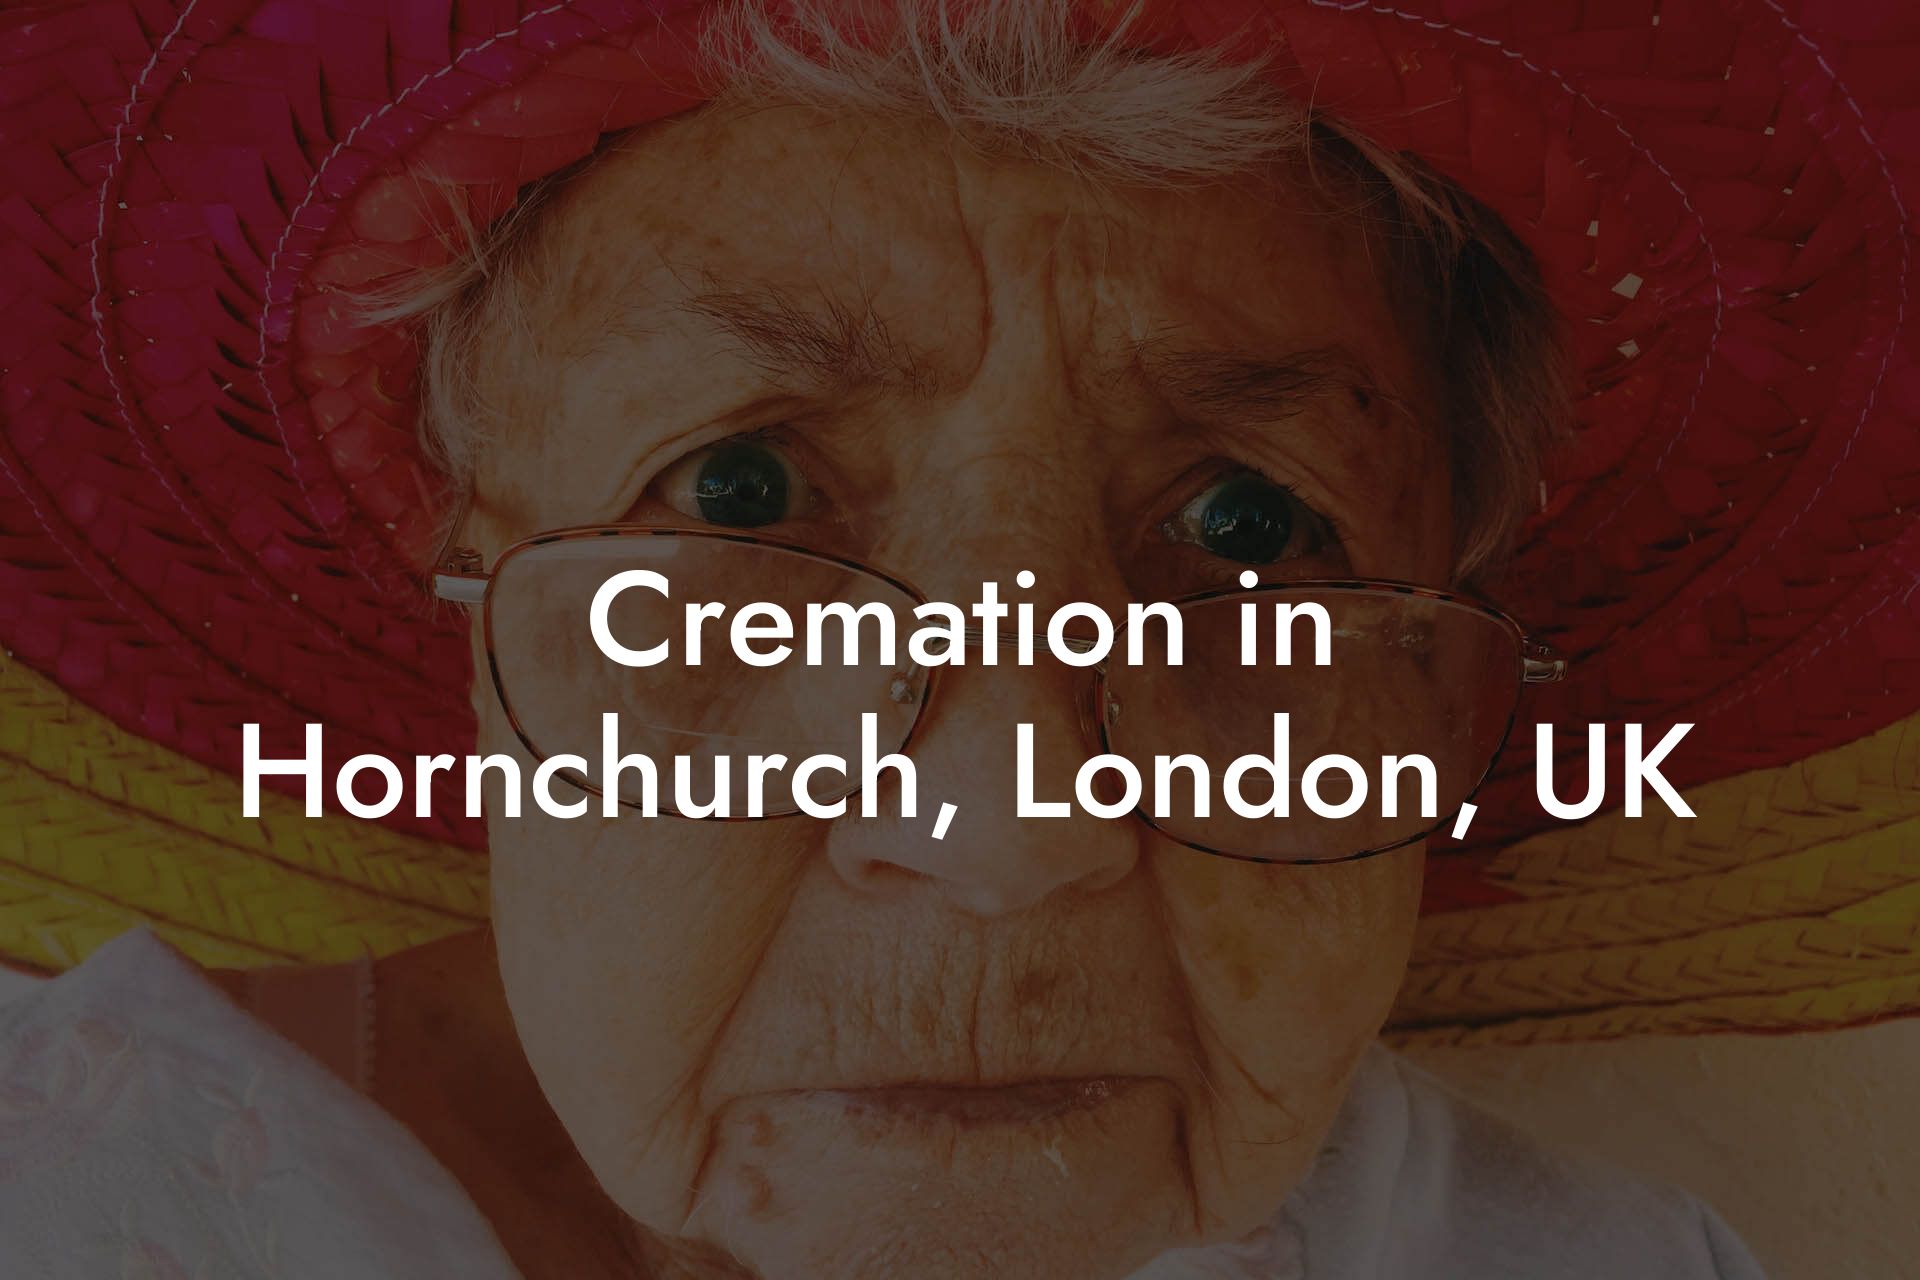 Cremation in Hornchurch, London, UK